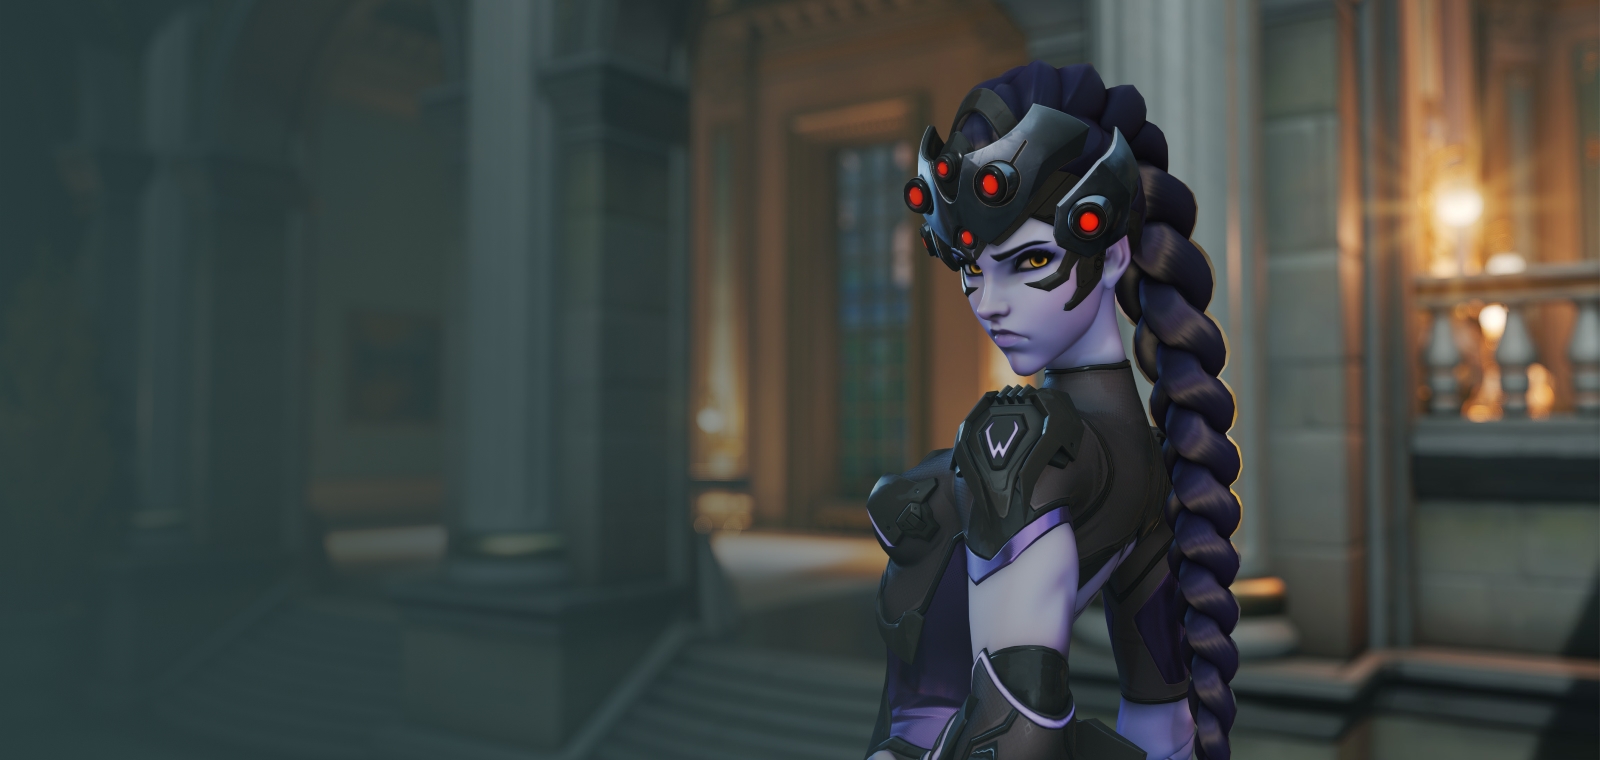 Overwatch 2: Widowmaker's Brainwashing Could Be A Key Part of The